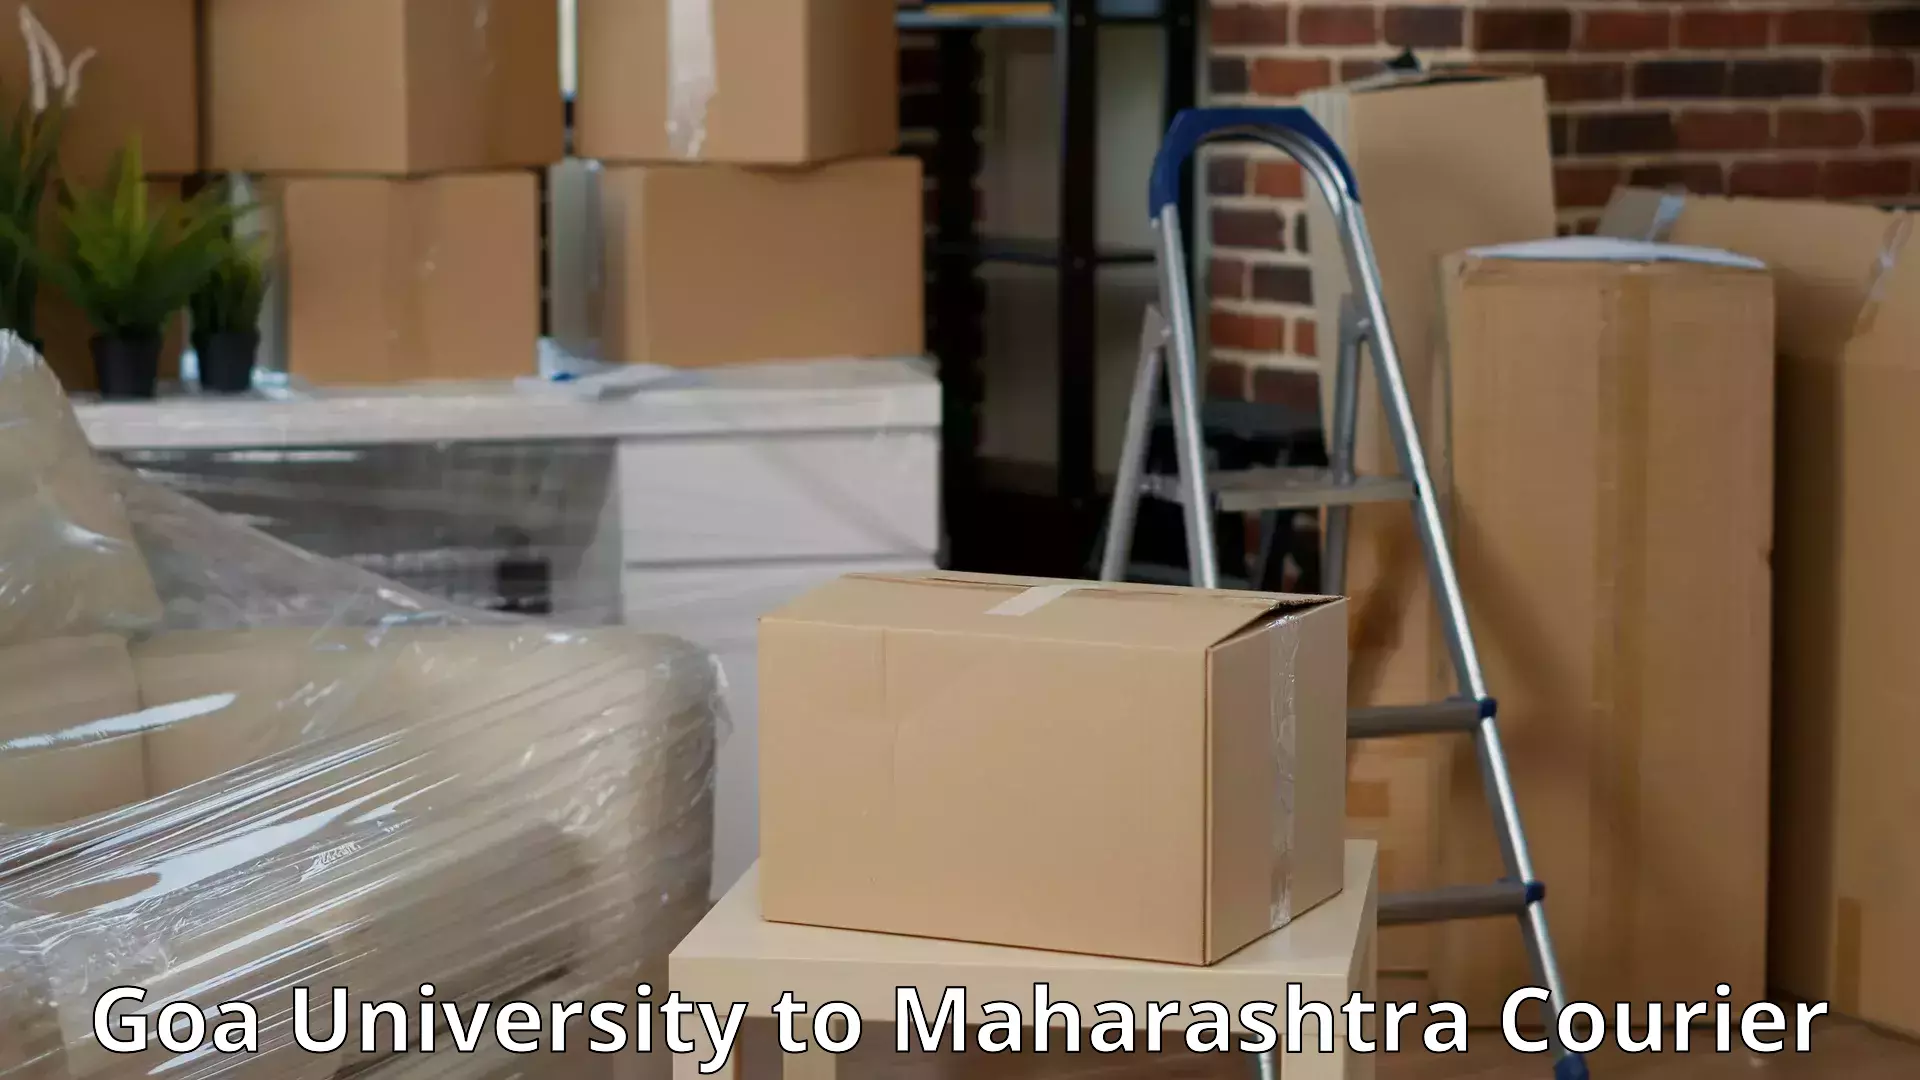 Professional movers and packers in Goa University to Rajgurunagar